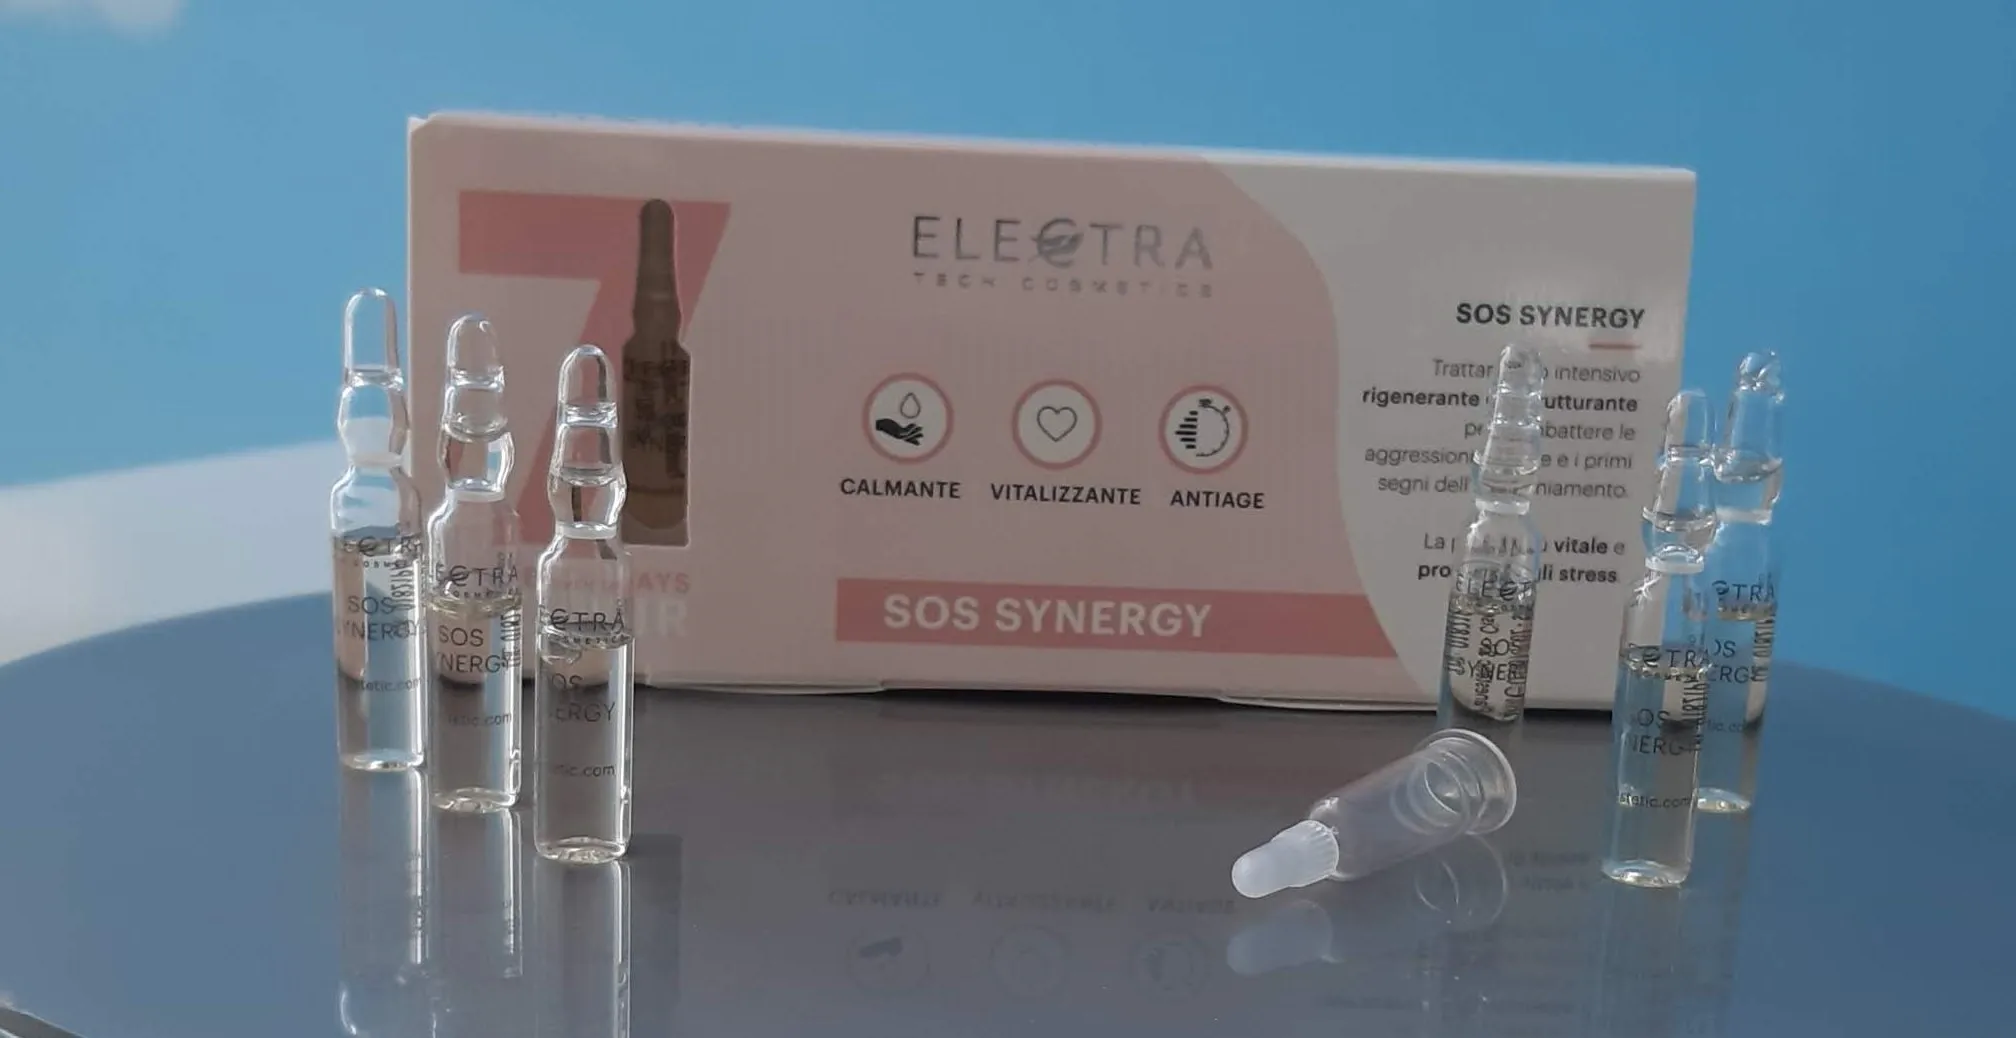 Electra 7 Days Sos Synergy Face Serum single dose ampoules Soothing Treatment Made in Italy Homeuse